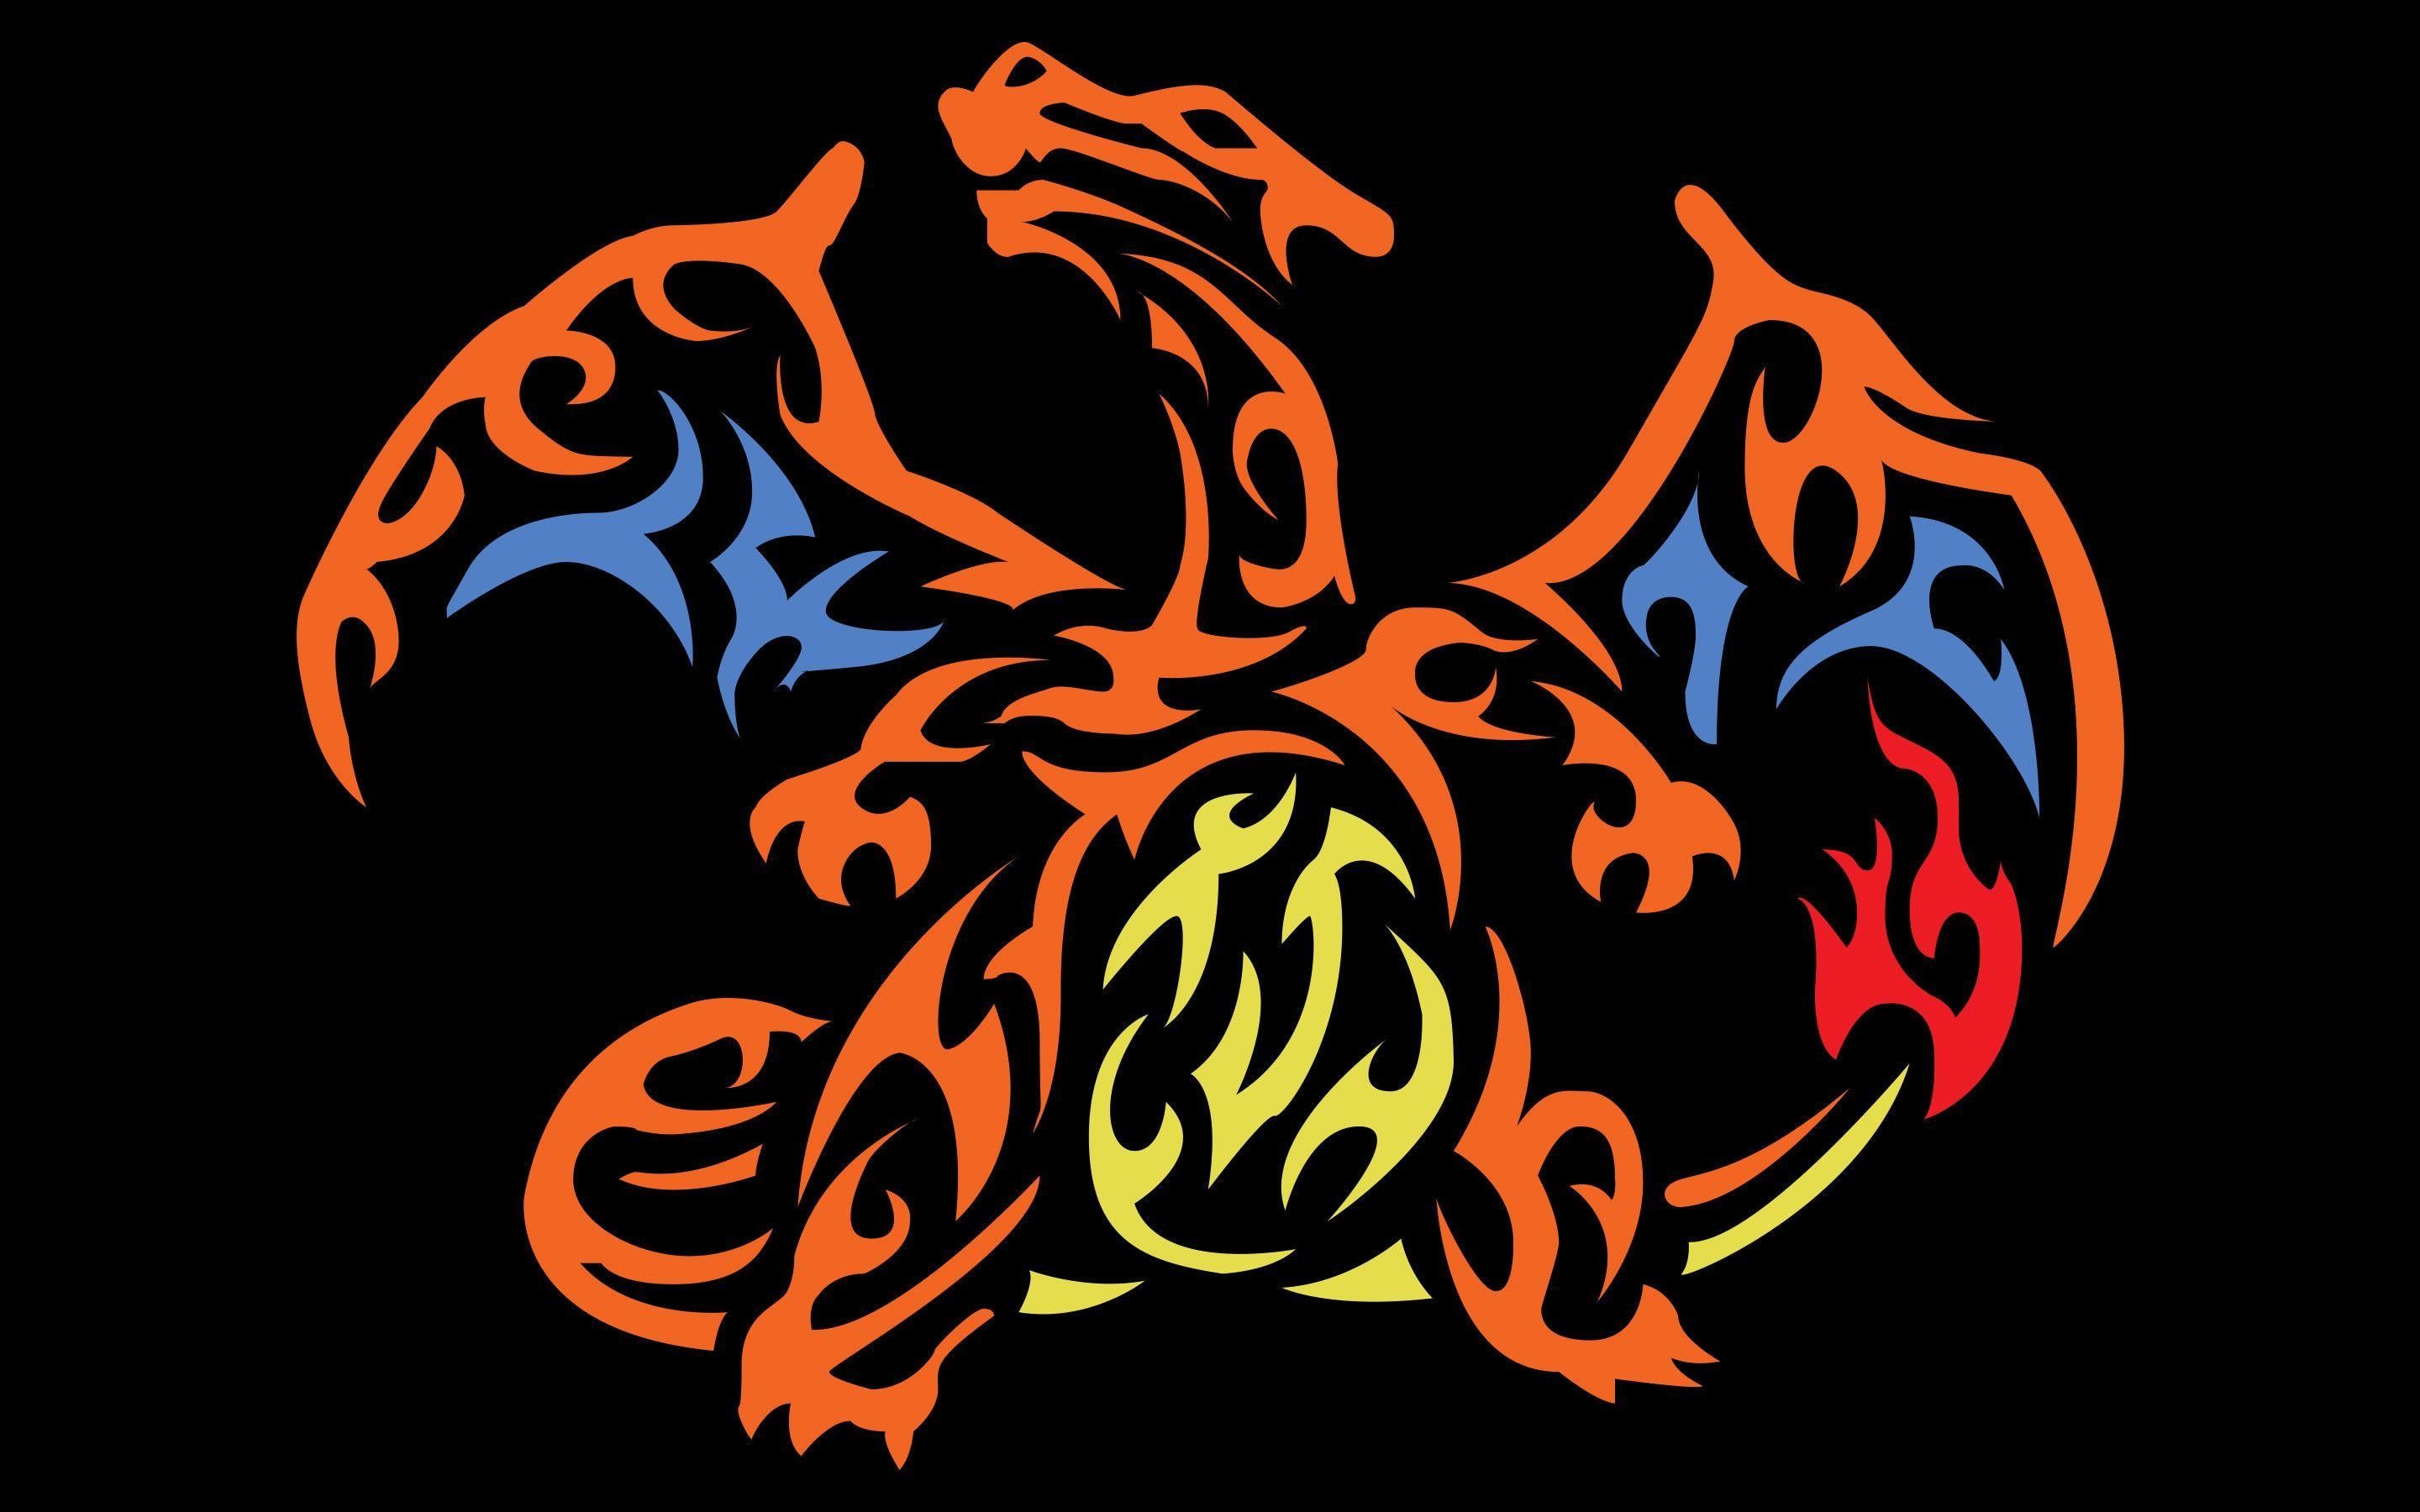 Charzard Wallpaper Free Charzard Background